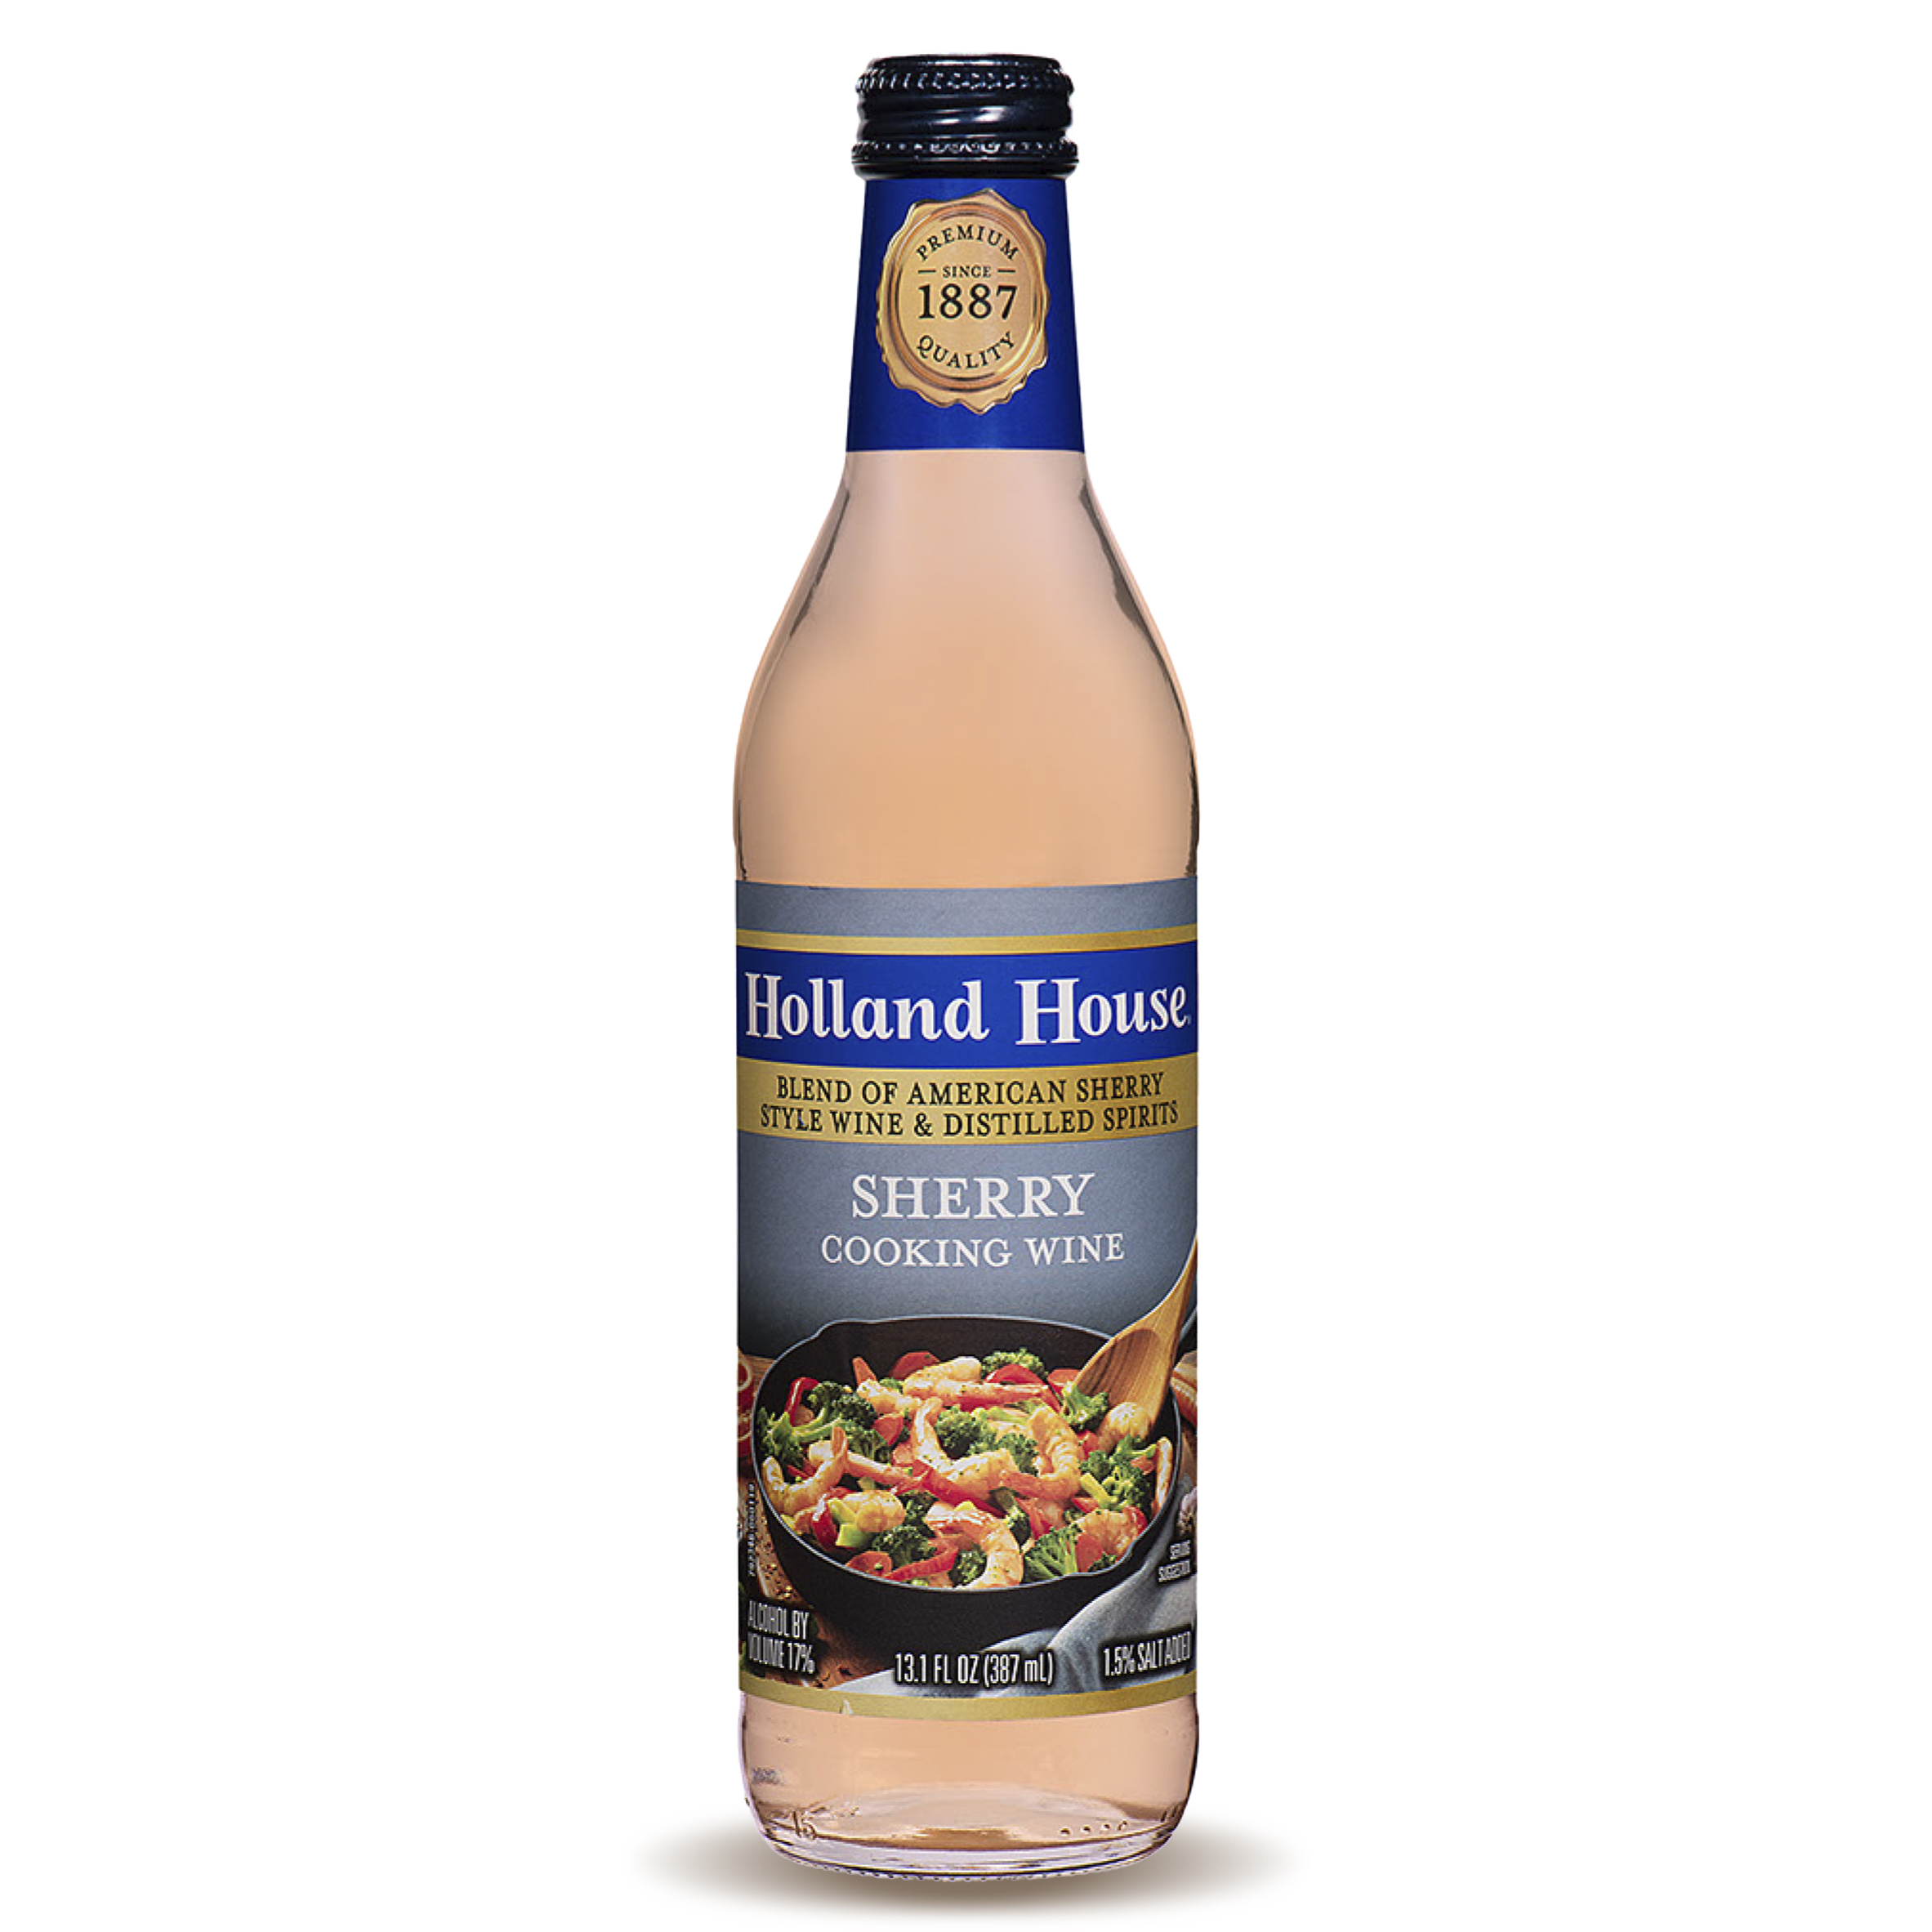 Holland House Sherry Cooking Wine, 13 fl oz - image 2 of 10